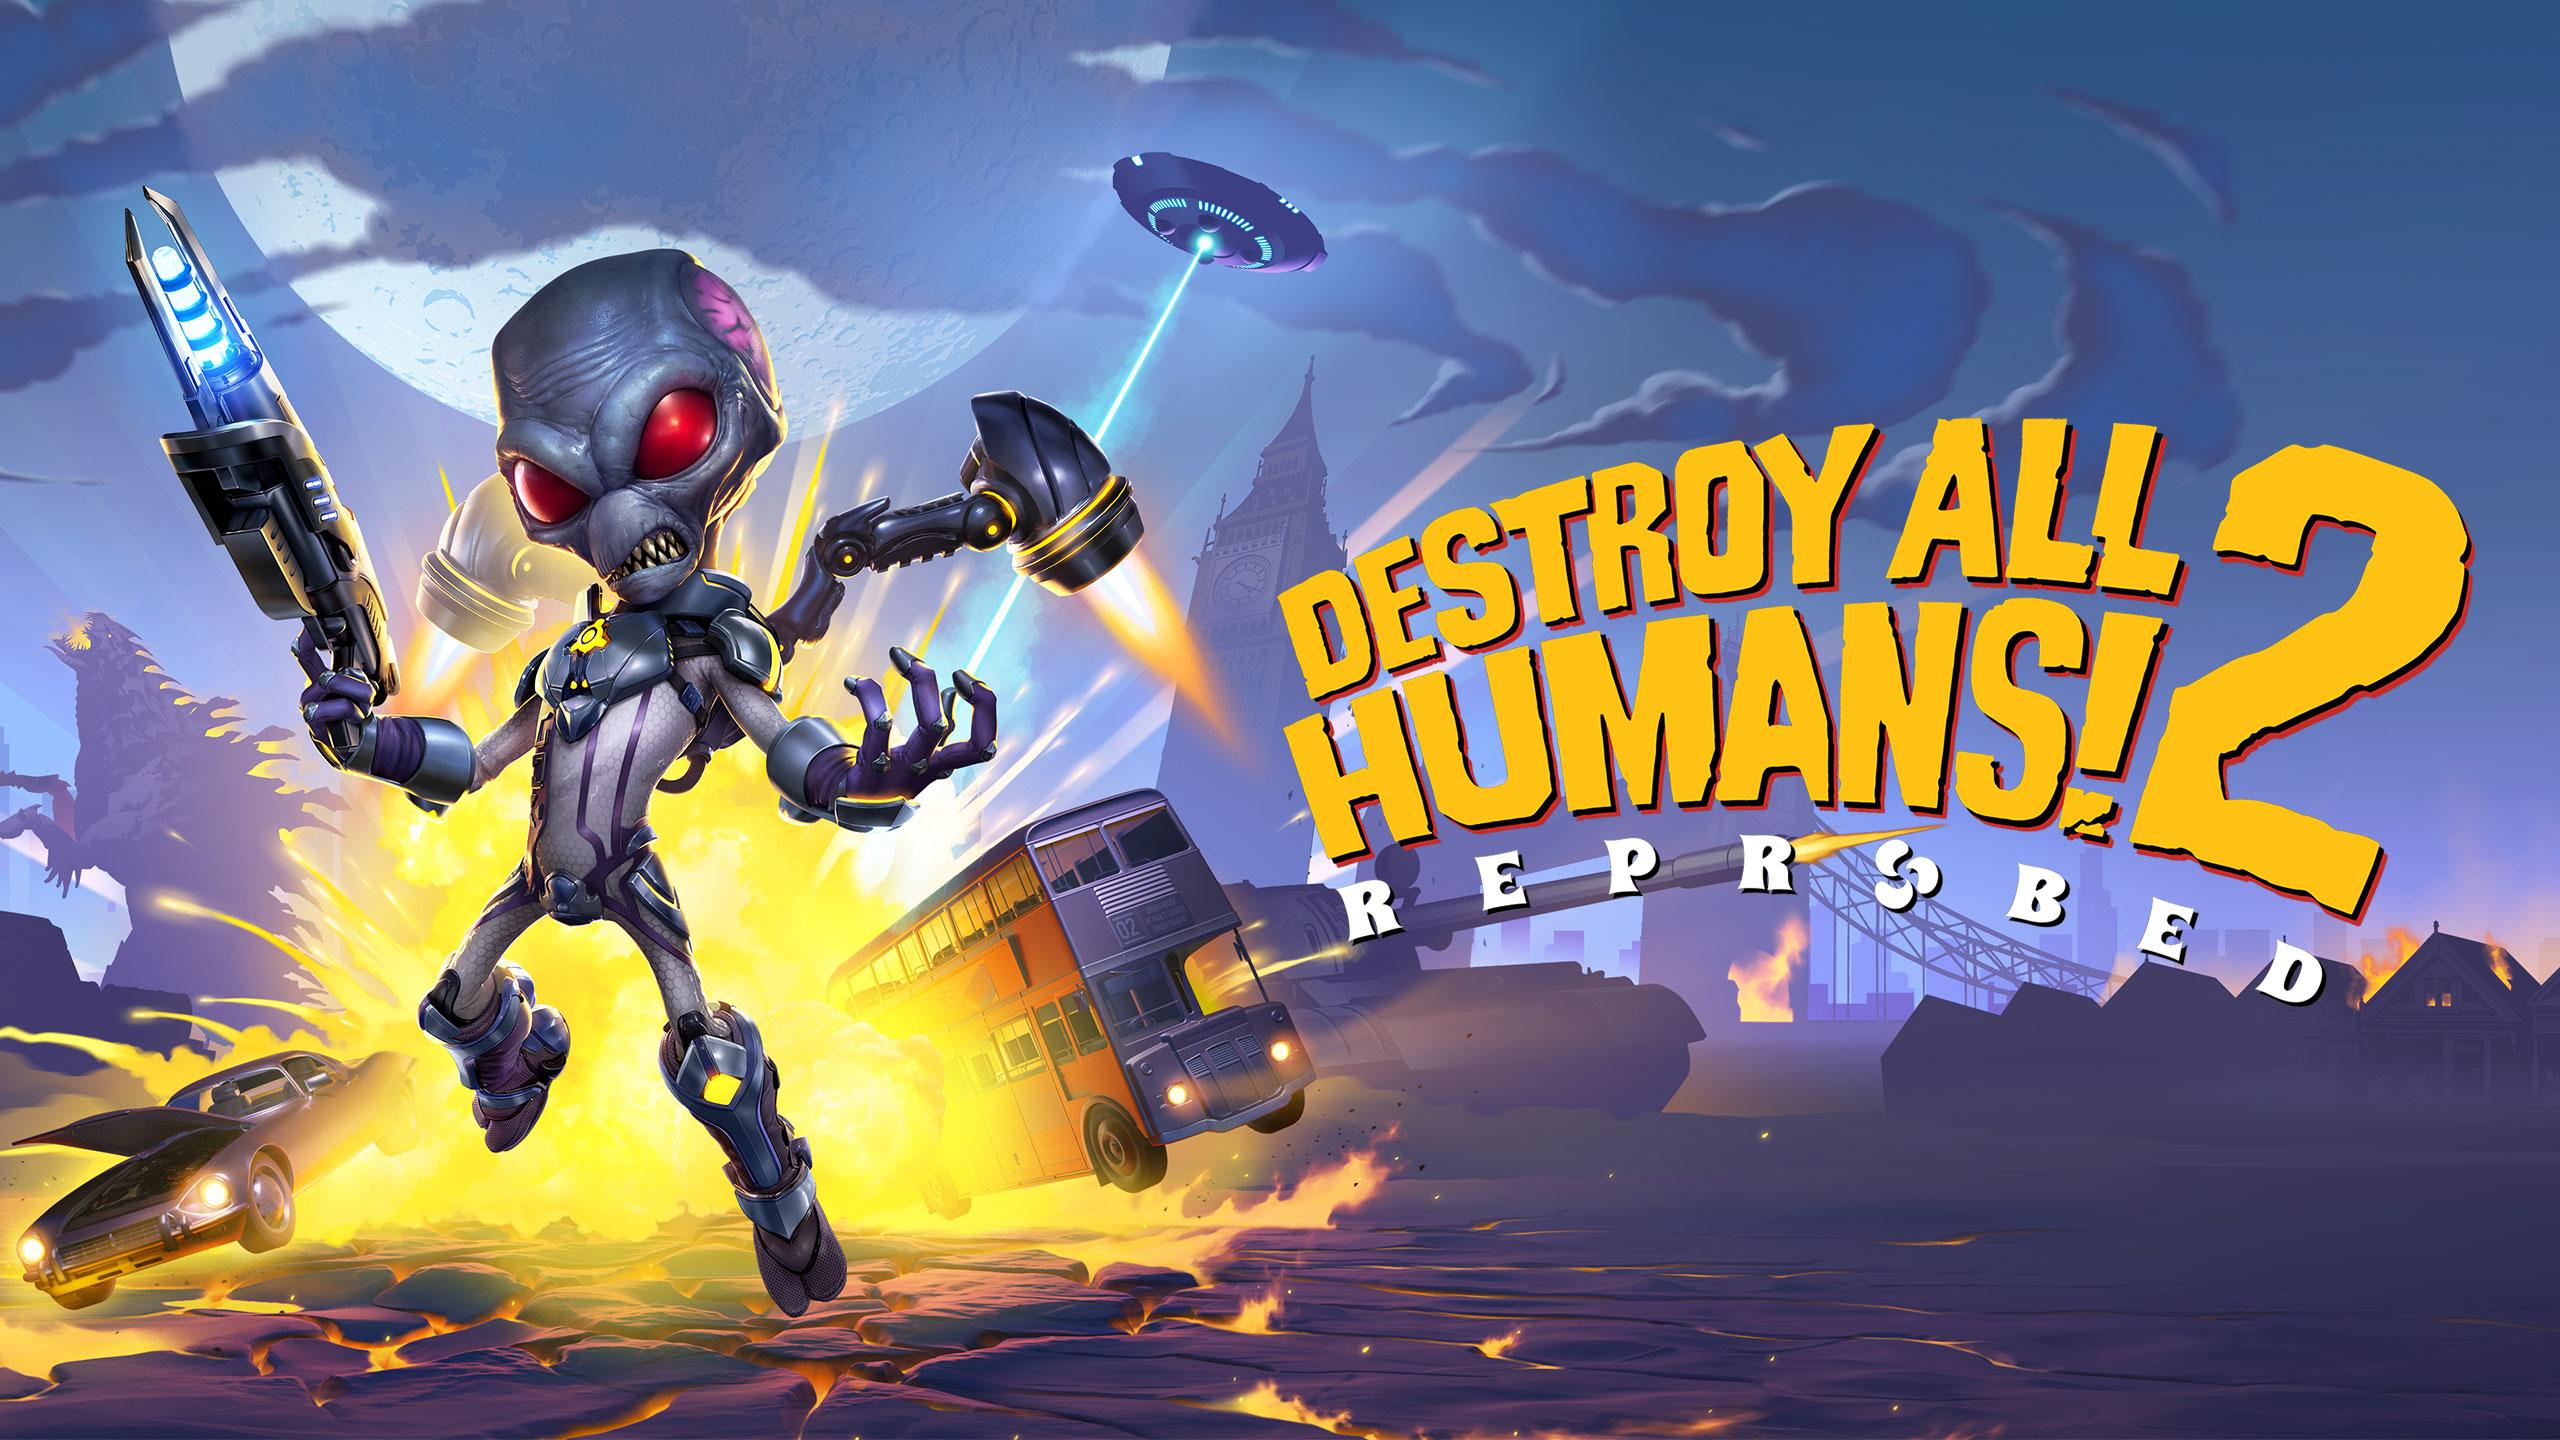 destroy-all-humans-2-reprobed-review-bring-on-a-3rd-game-wgb-home-of-awesome-reviews